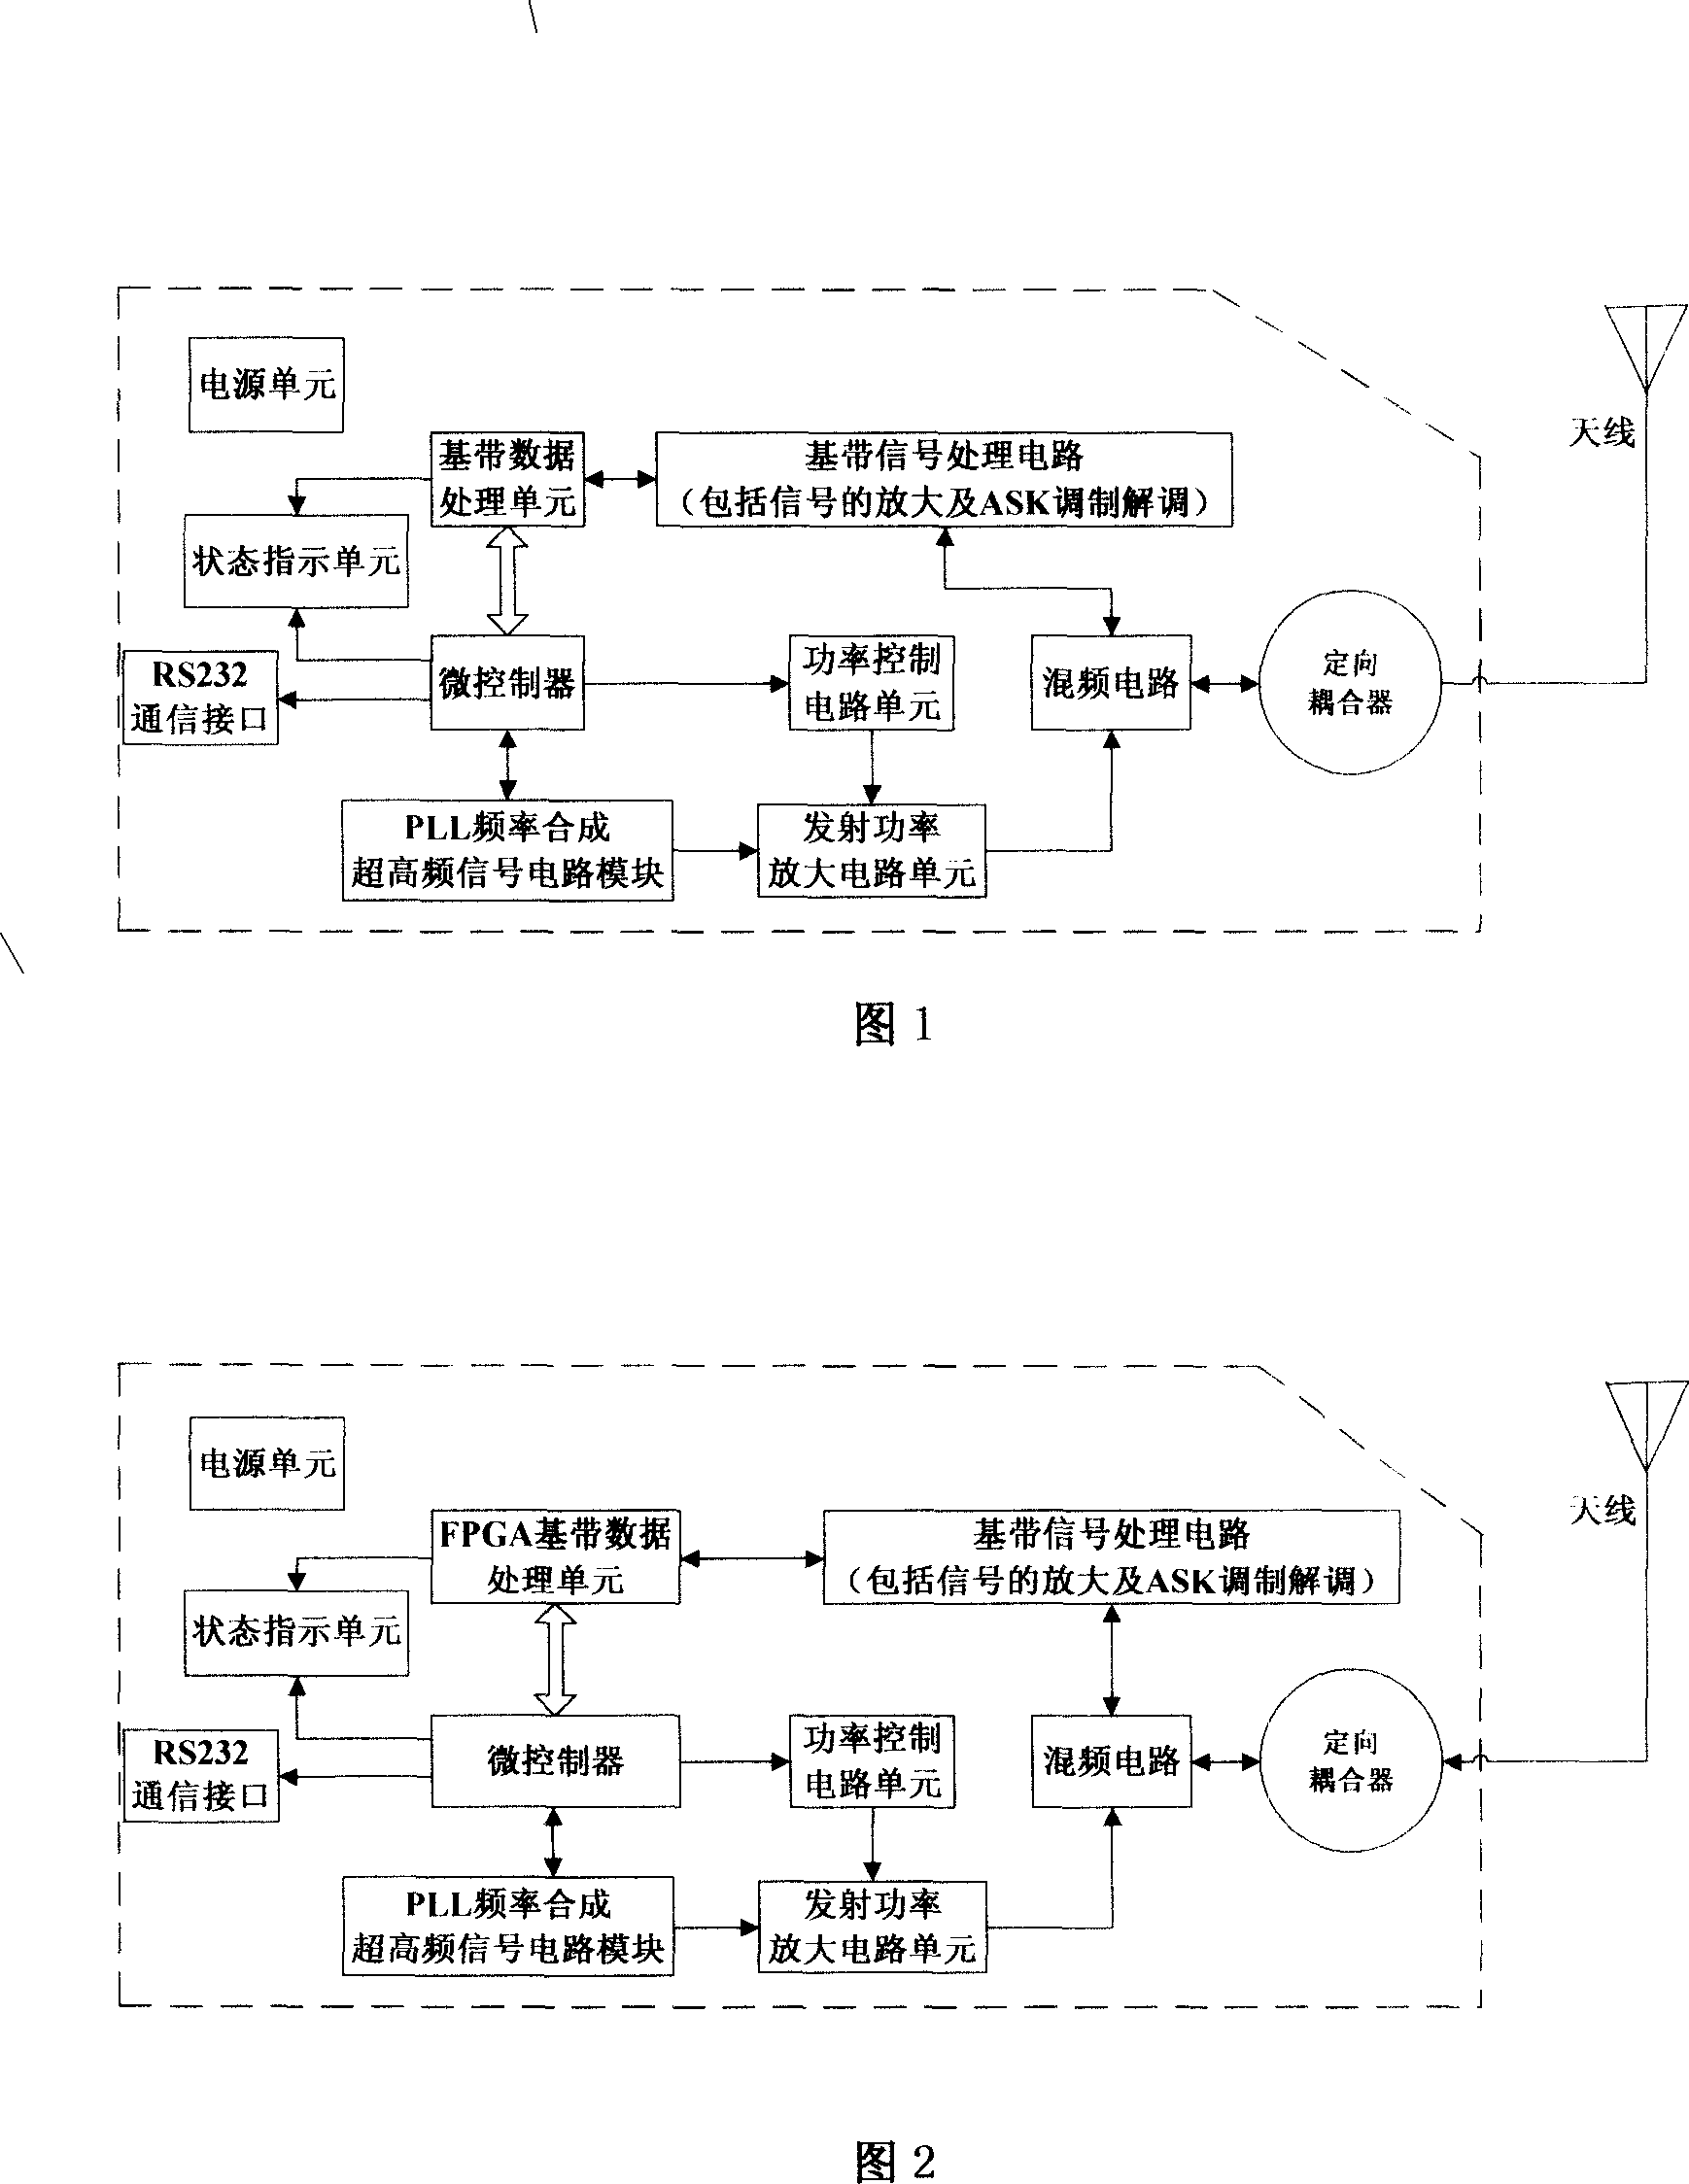 Distant contactless IC card read/write implement and method therefor